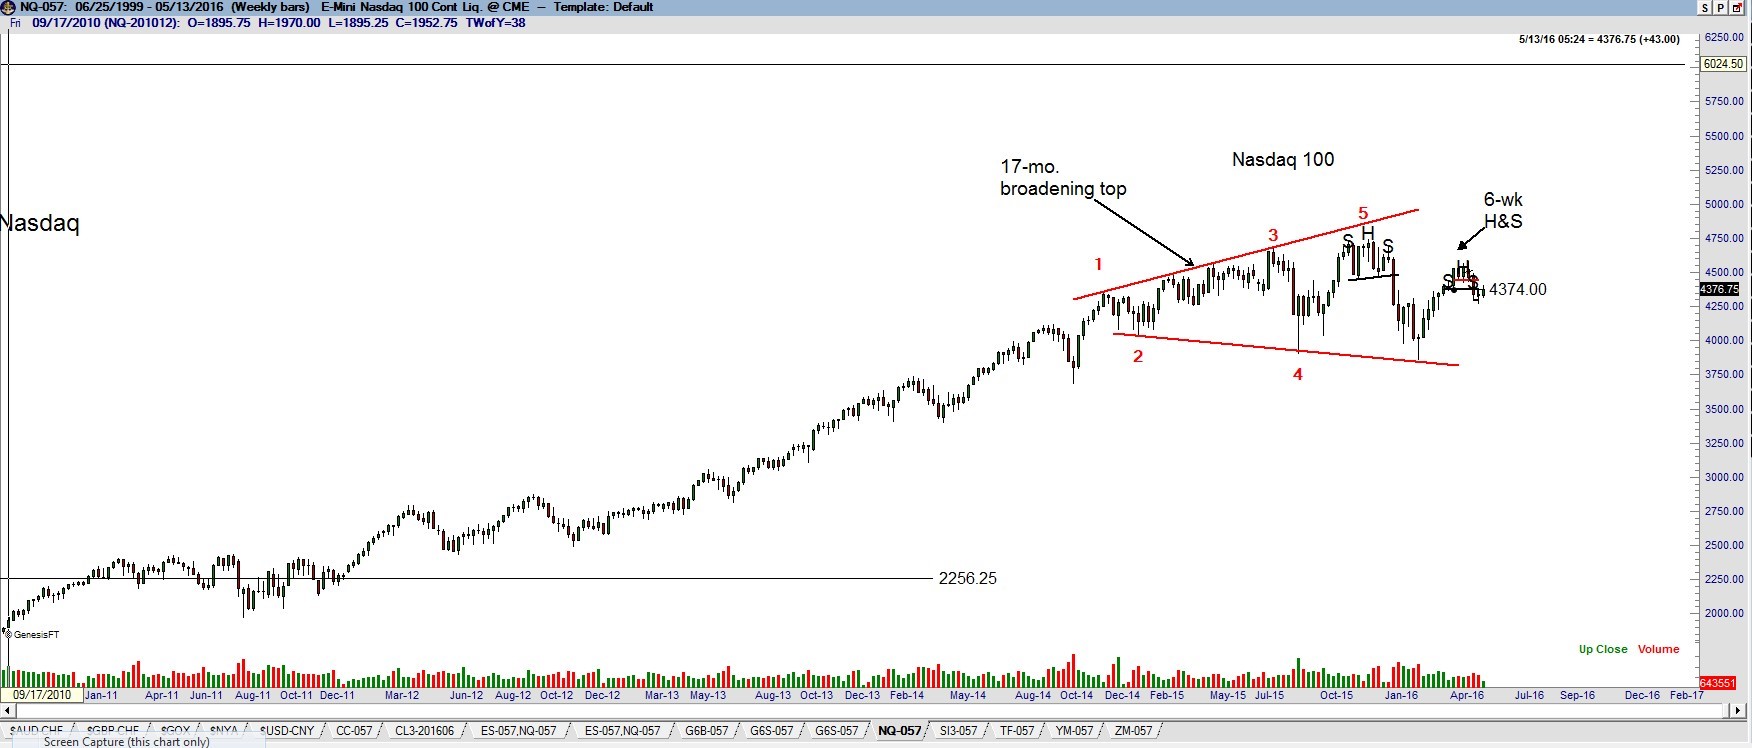 Nasdaq is tracing out a possible broadening top - Stock market updates - Factor Trrading - Peter Brandt